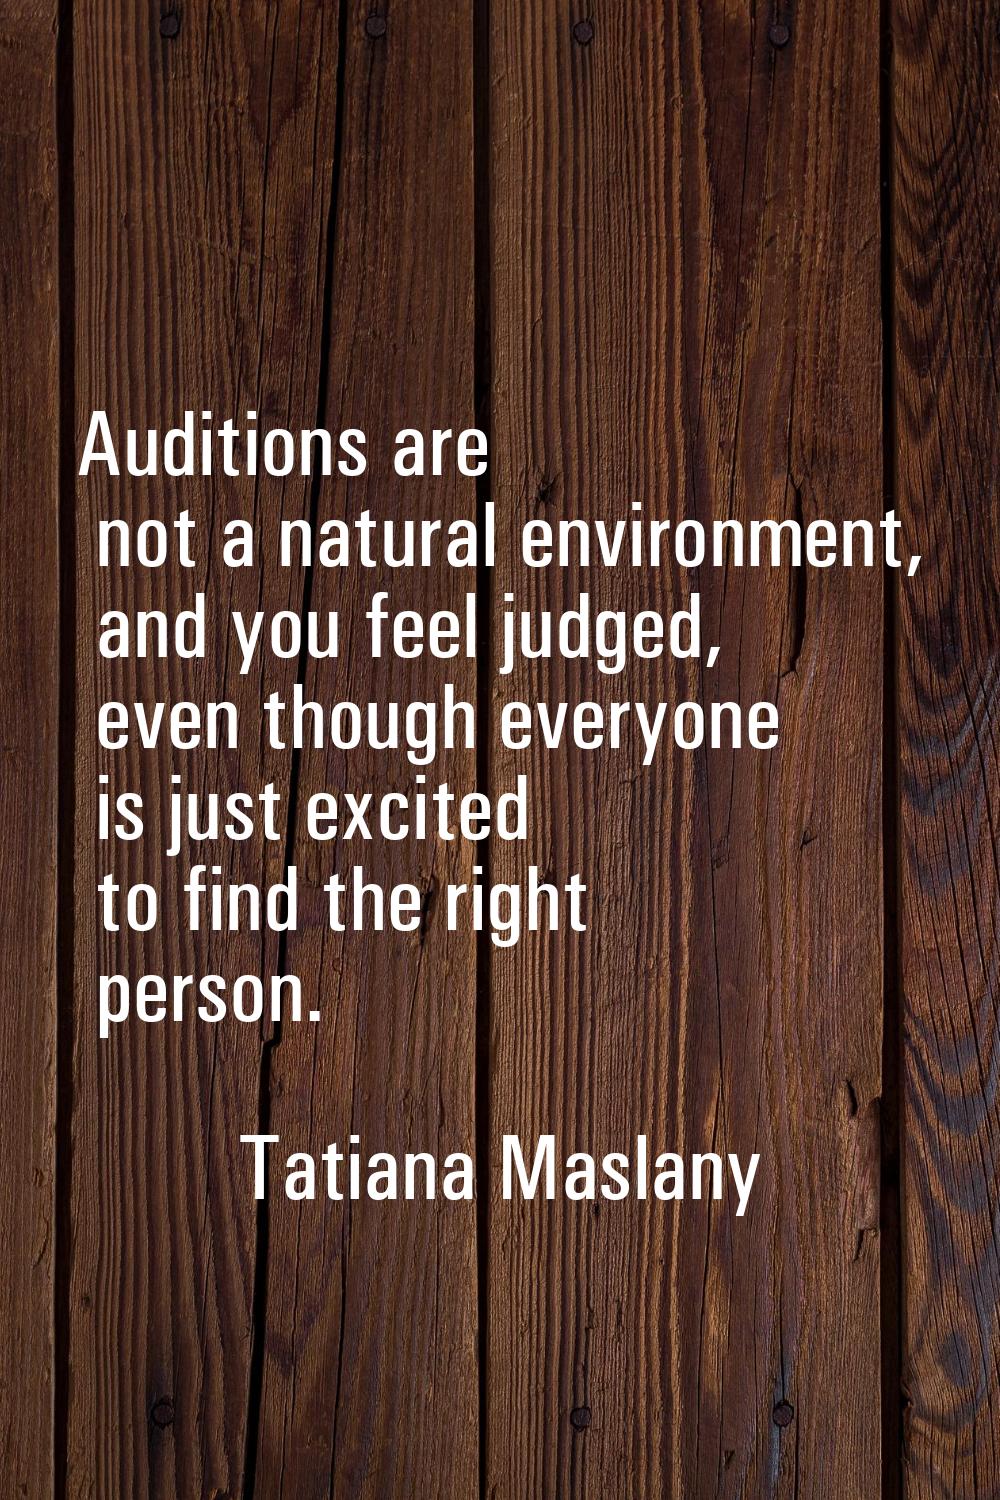 Auditions are not a natural environment, and you feel judged, even though everyone is just excited 